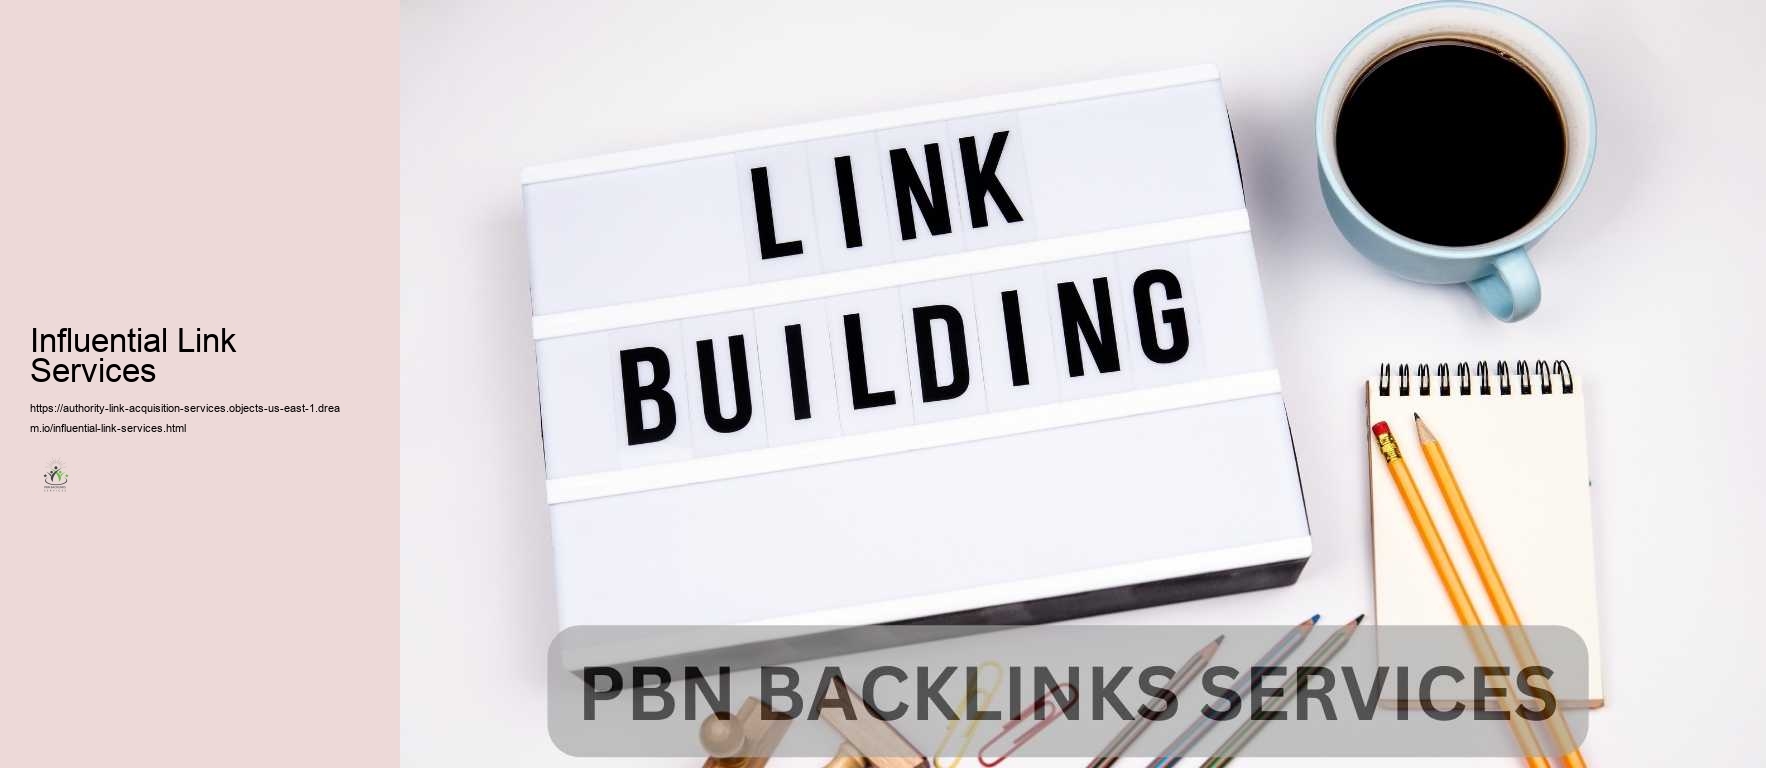 Influential Link Services